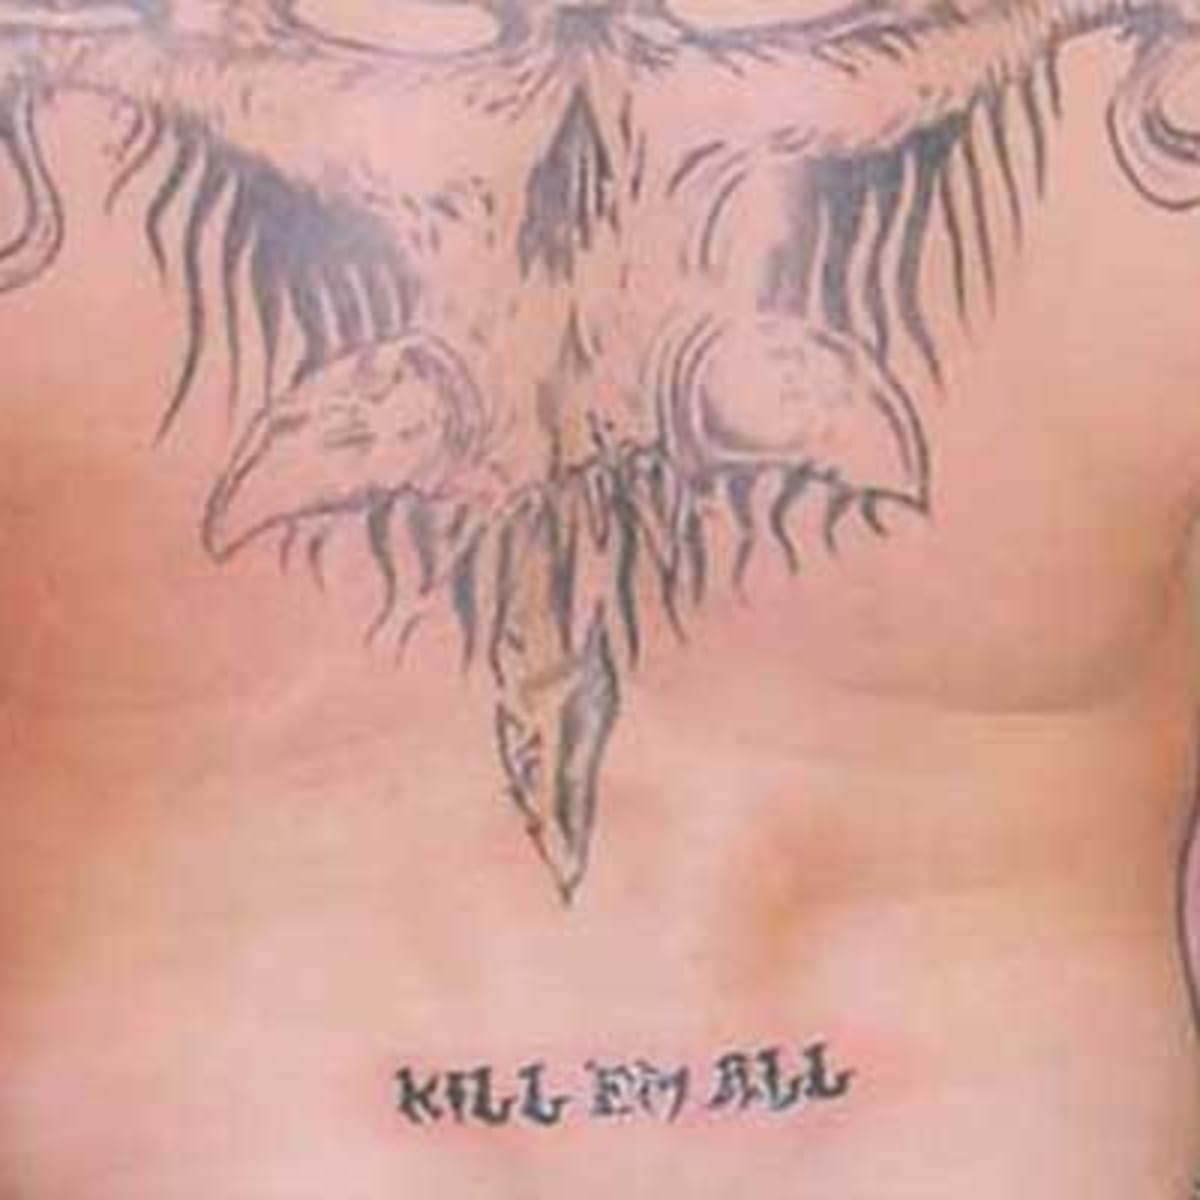 Brock Lesnar Back Tattoo What does it represent